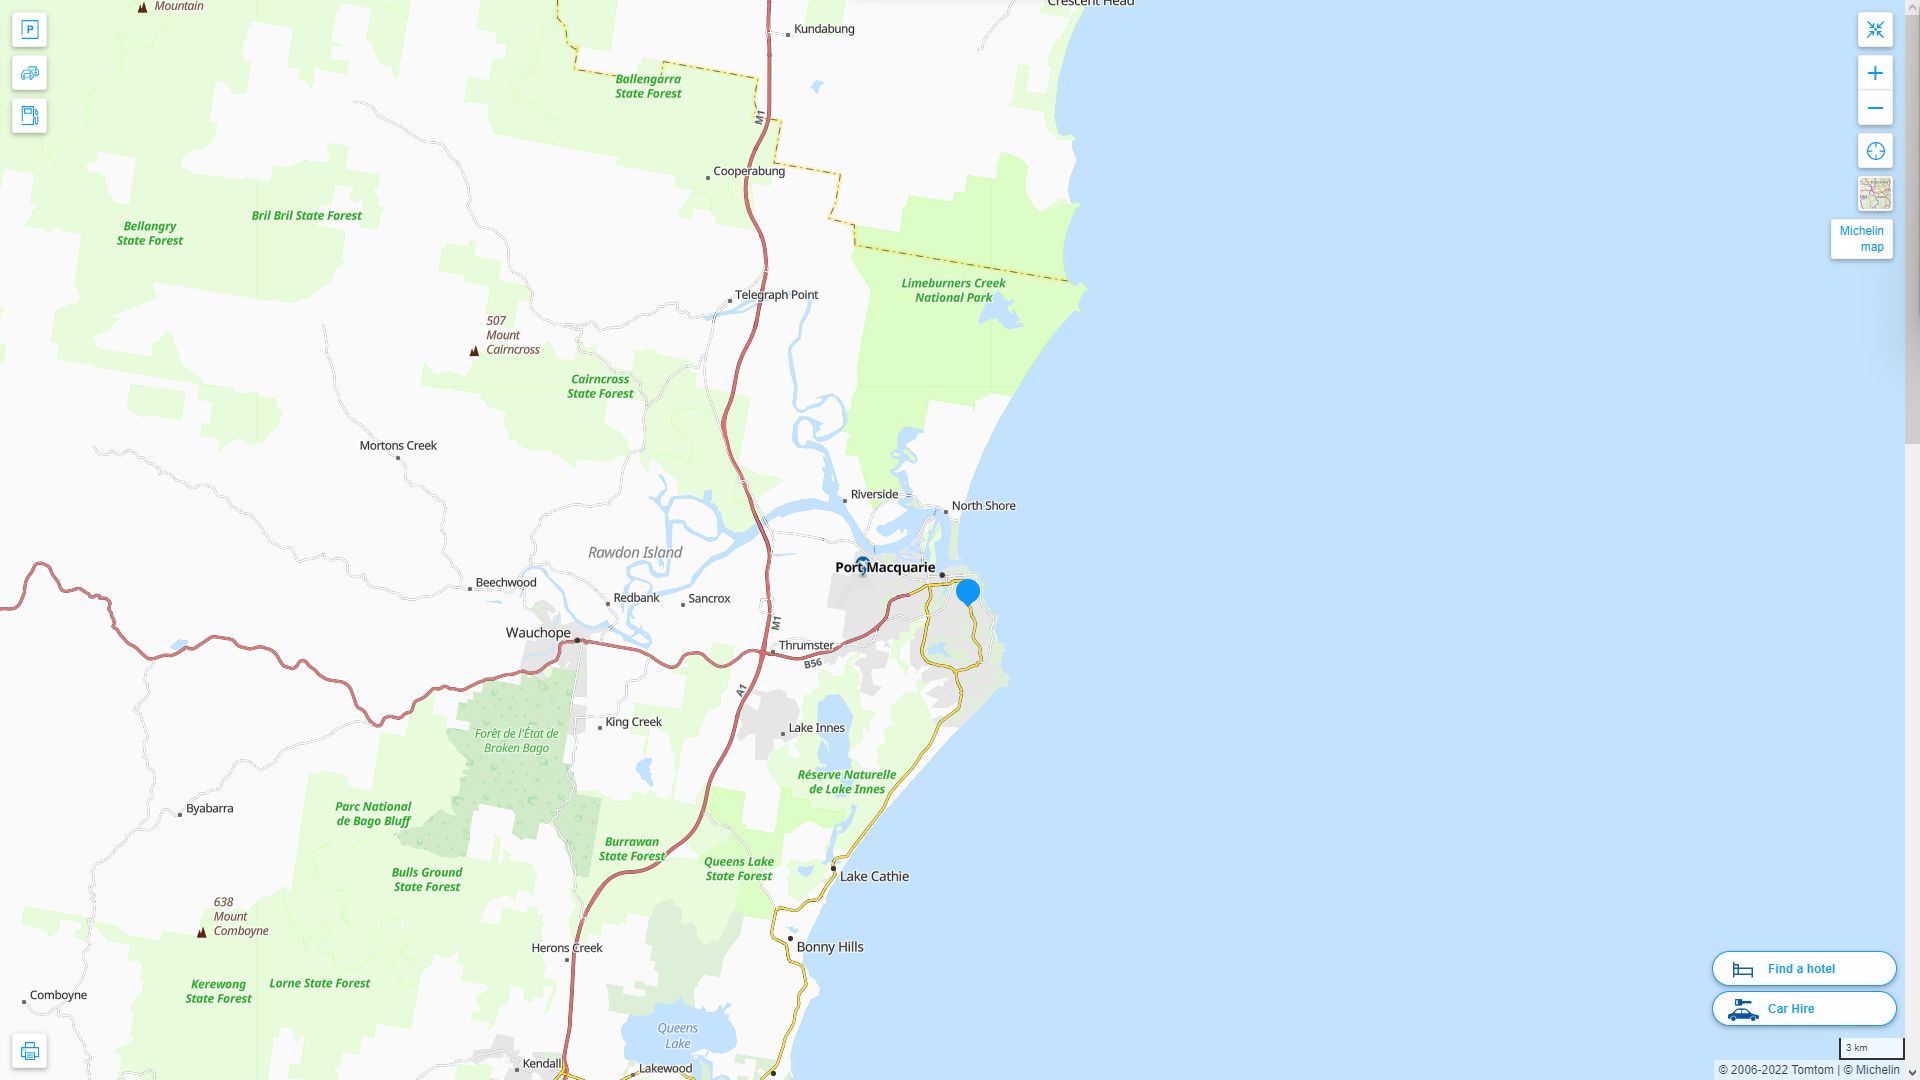 Port Macquarie Highway and Road Map